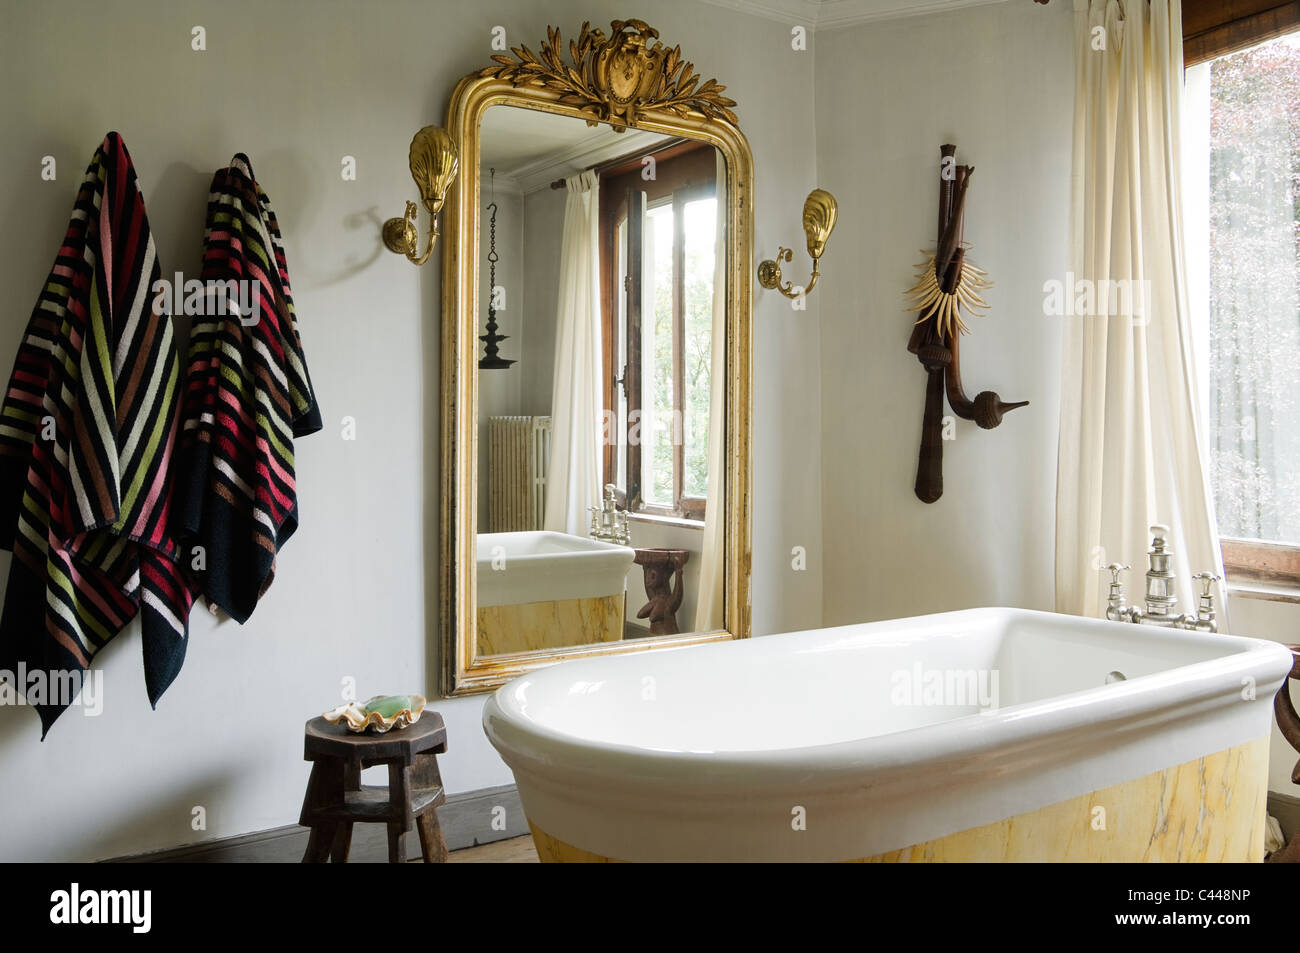 Freestanding marble bathtub in bathroom with wooden flooring and large gilt framed mirror Stock Photo